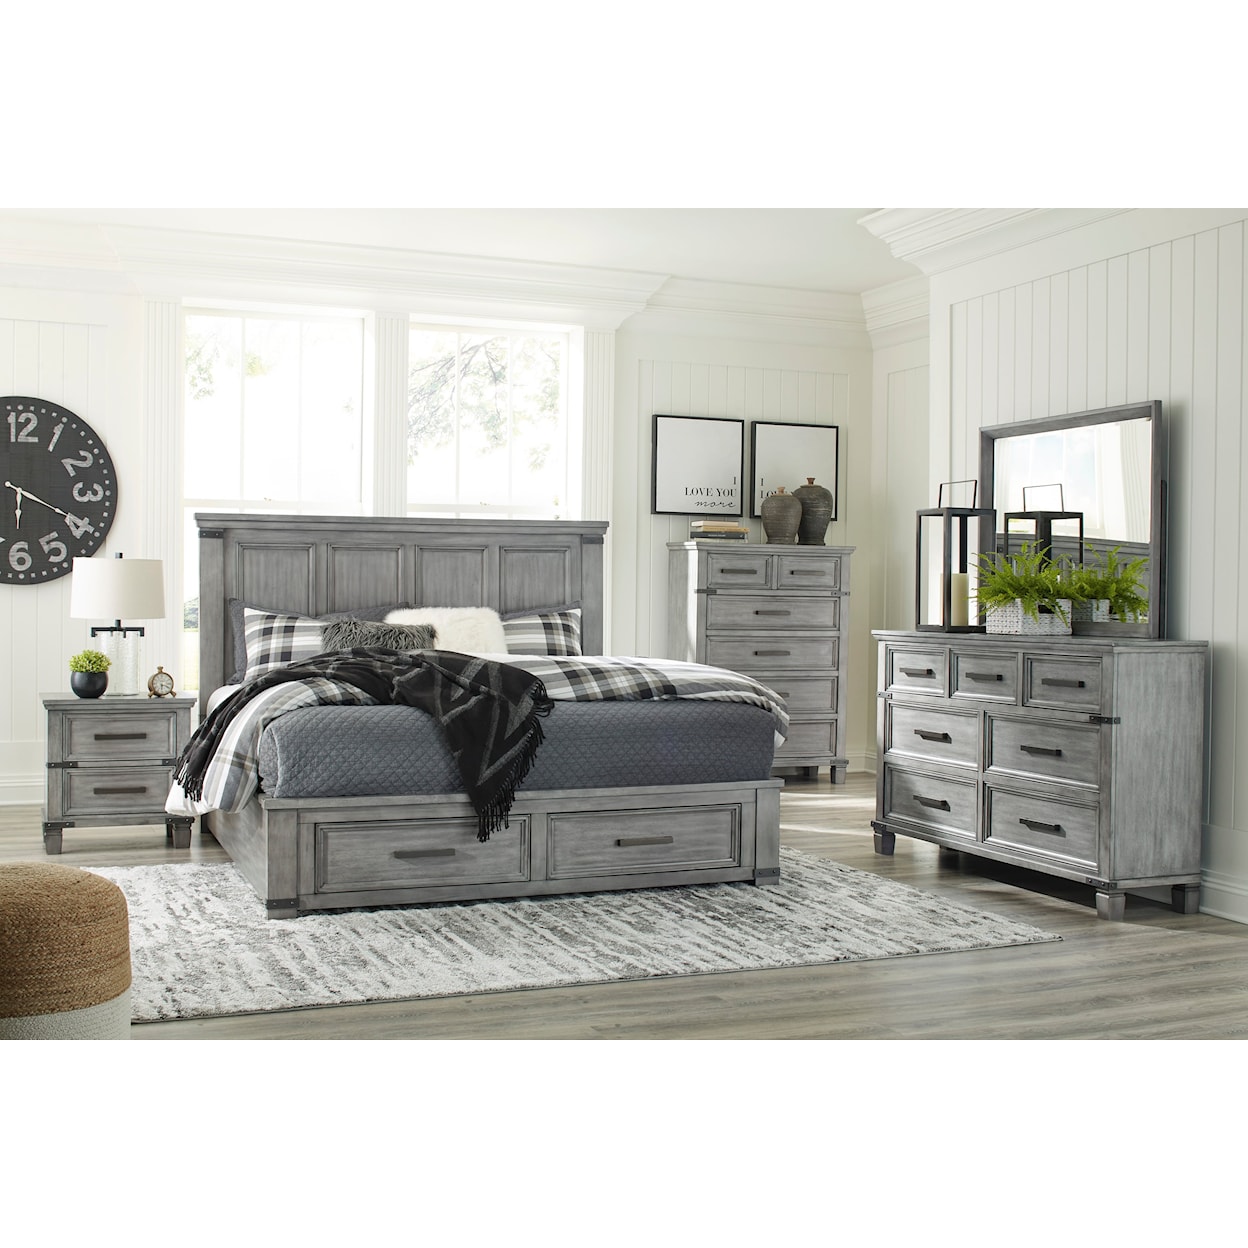 Signature Design by Ashley Russelyn King Storage Bed, Dresser, Mirror, Chest